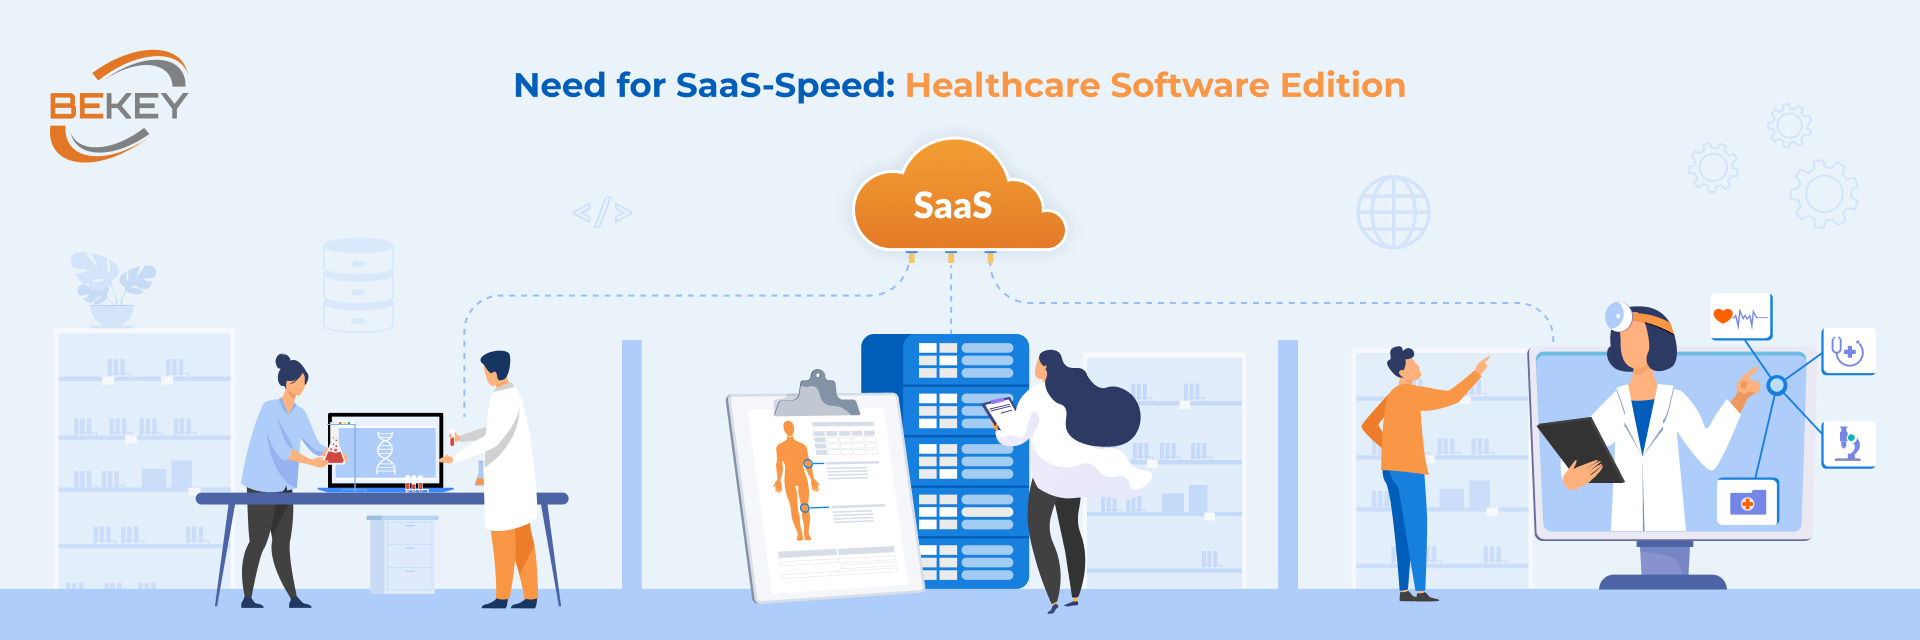 Need for SaaS-Speed: healthcare software edition 